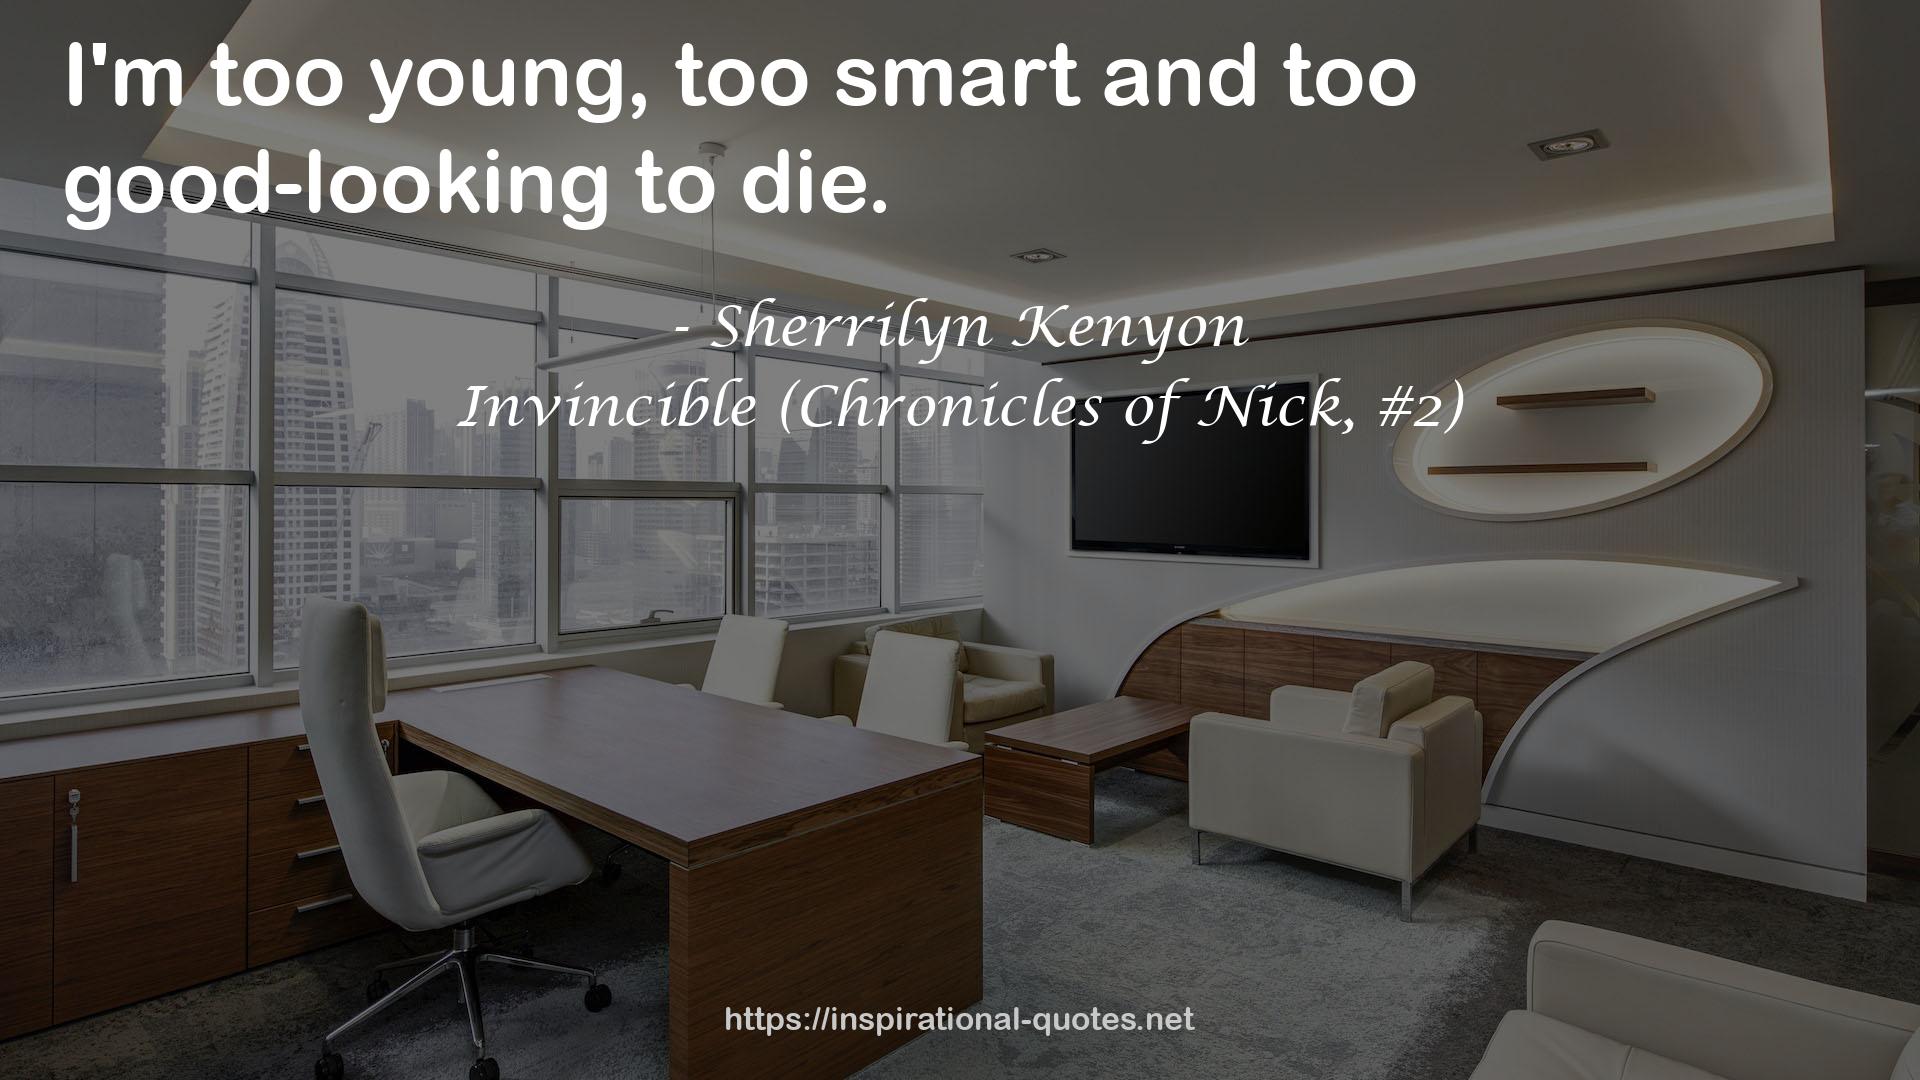 Invincible (Chronicles of Nick, #2) QUOTES